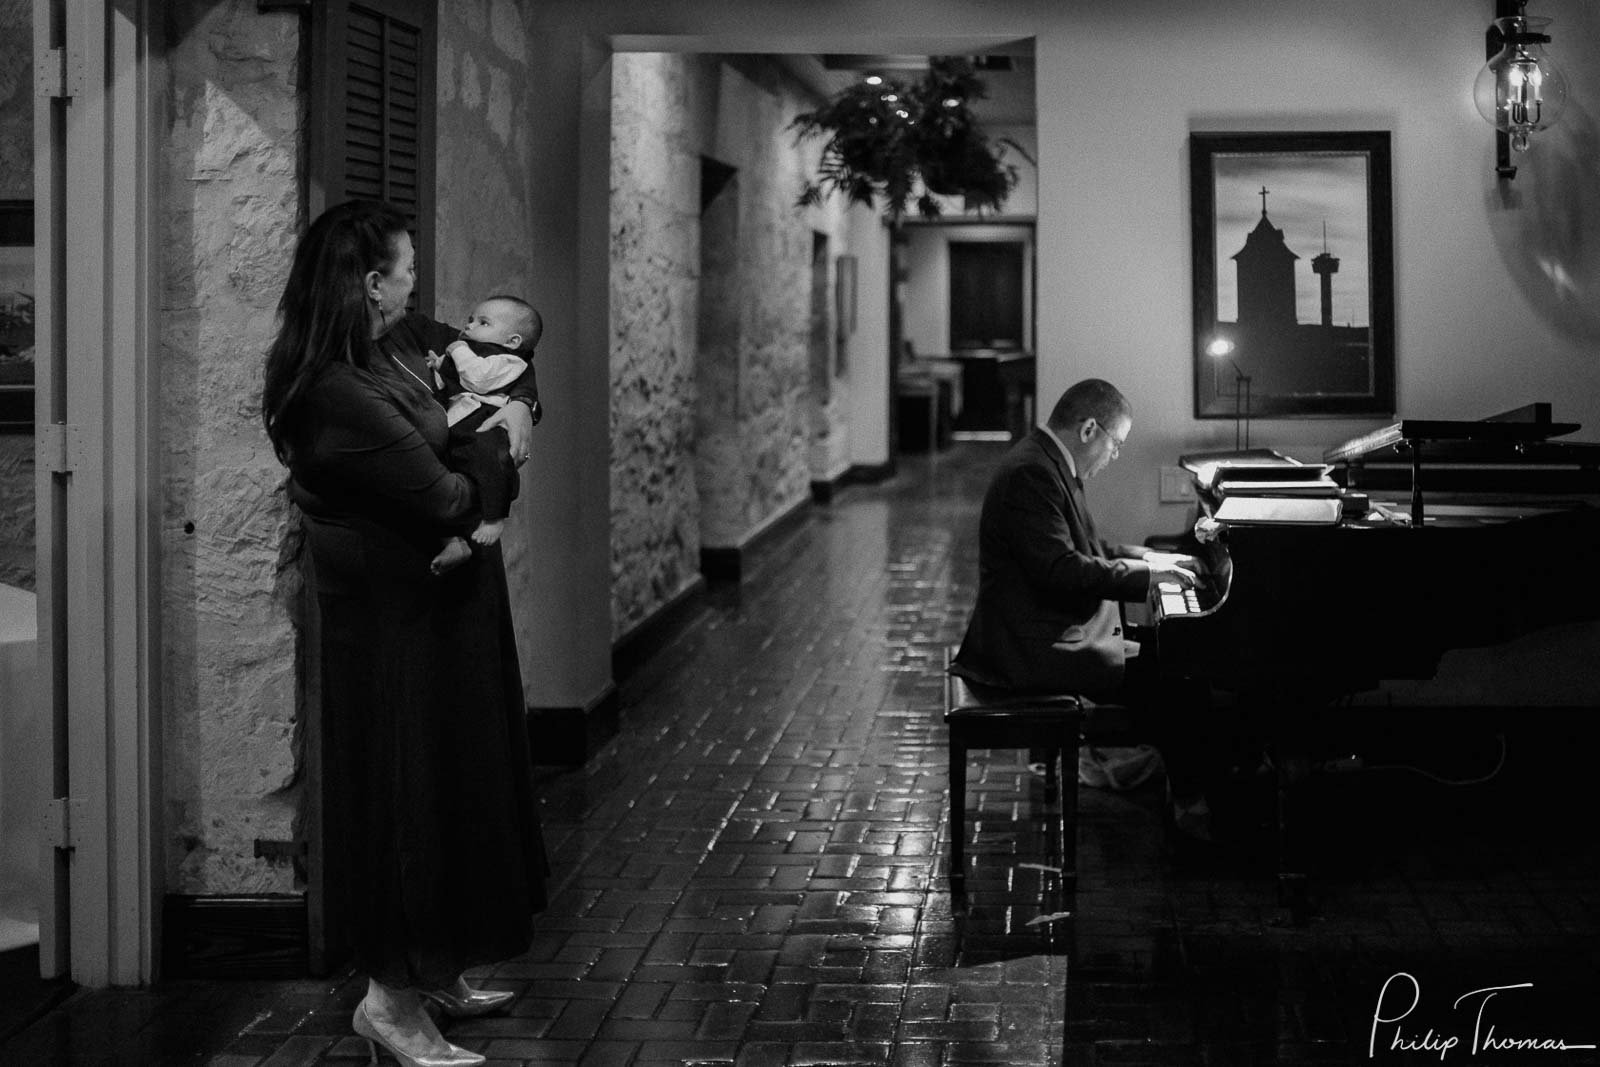 A baby is held tightly with piano player in background Club Giraud Wedding Reception San Antonio weddings Philip Thomas Photography